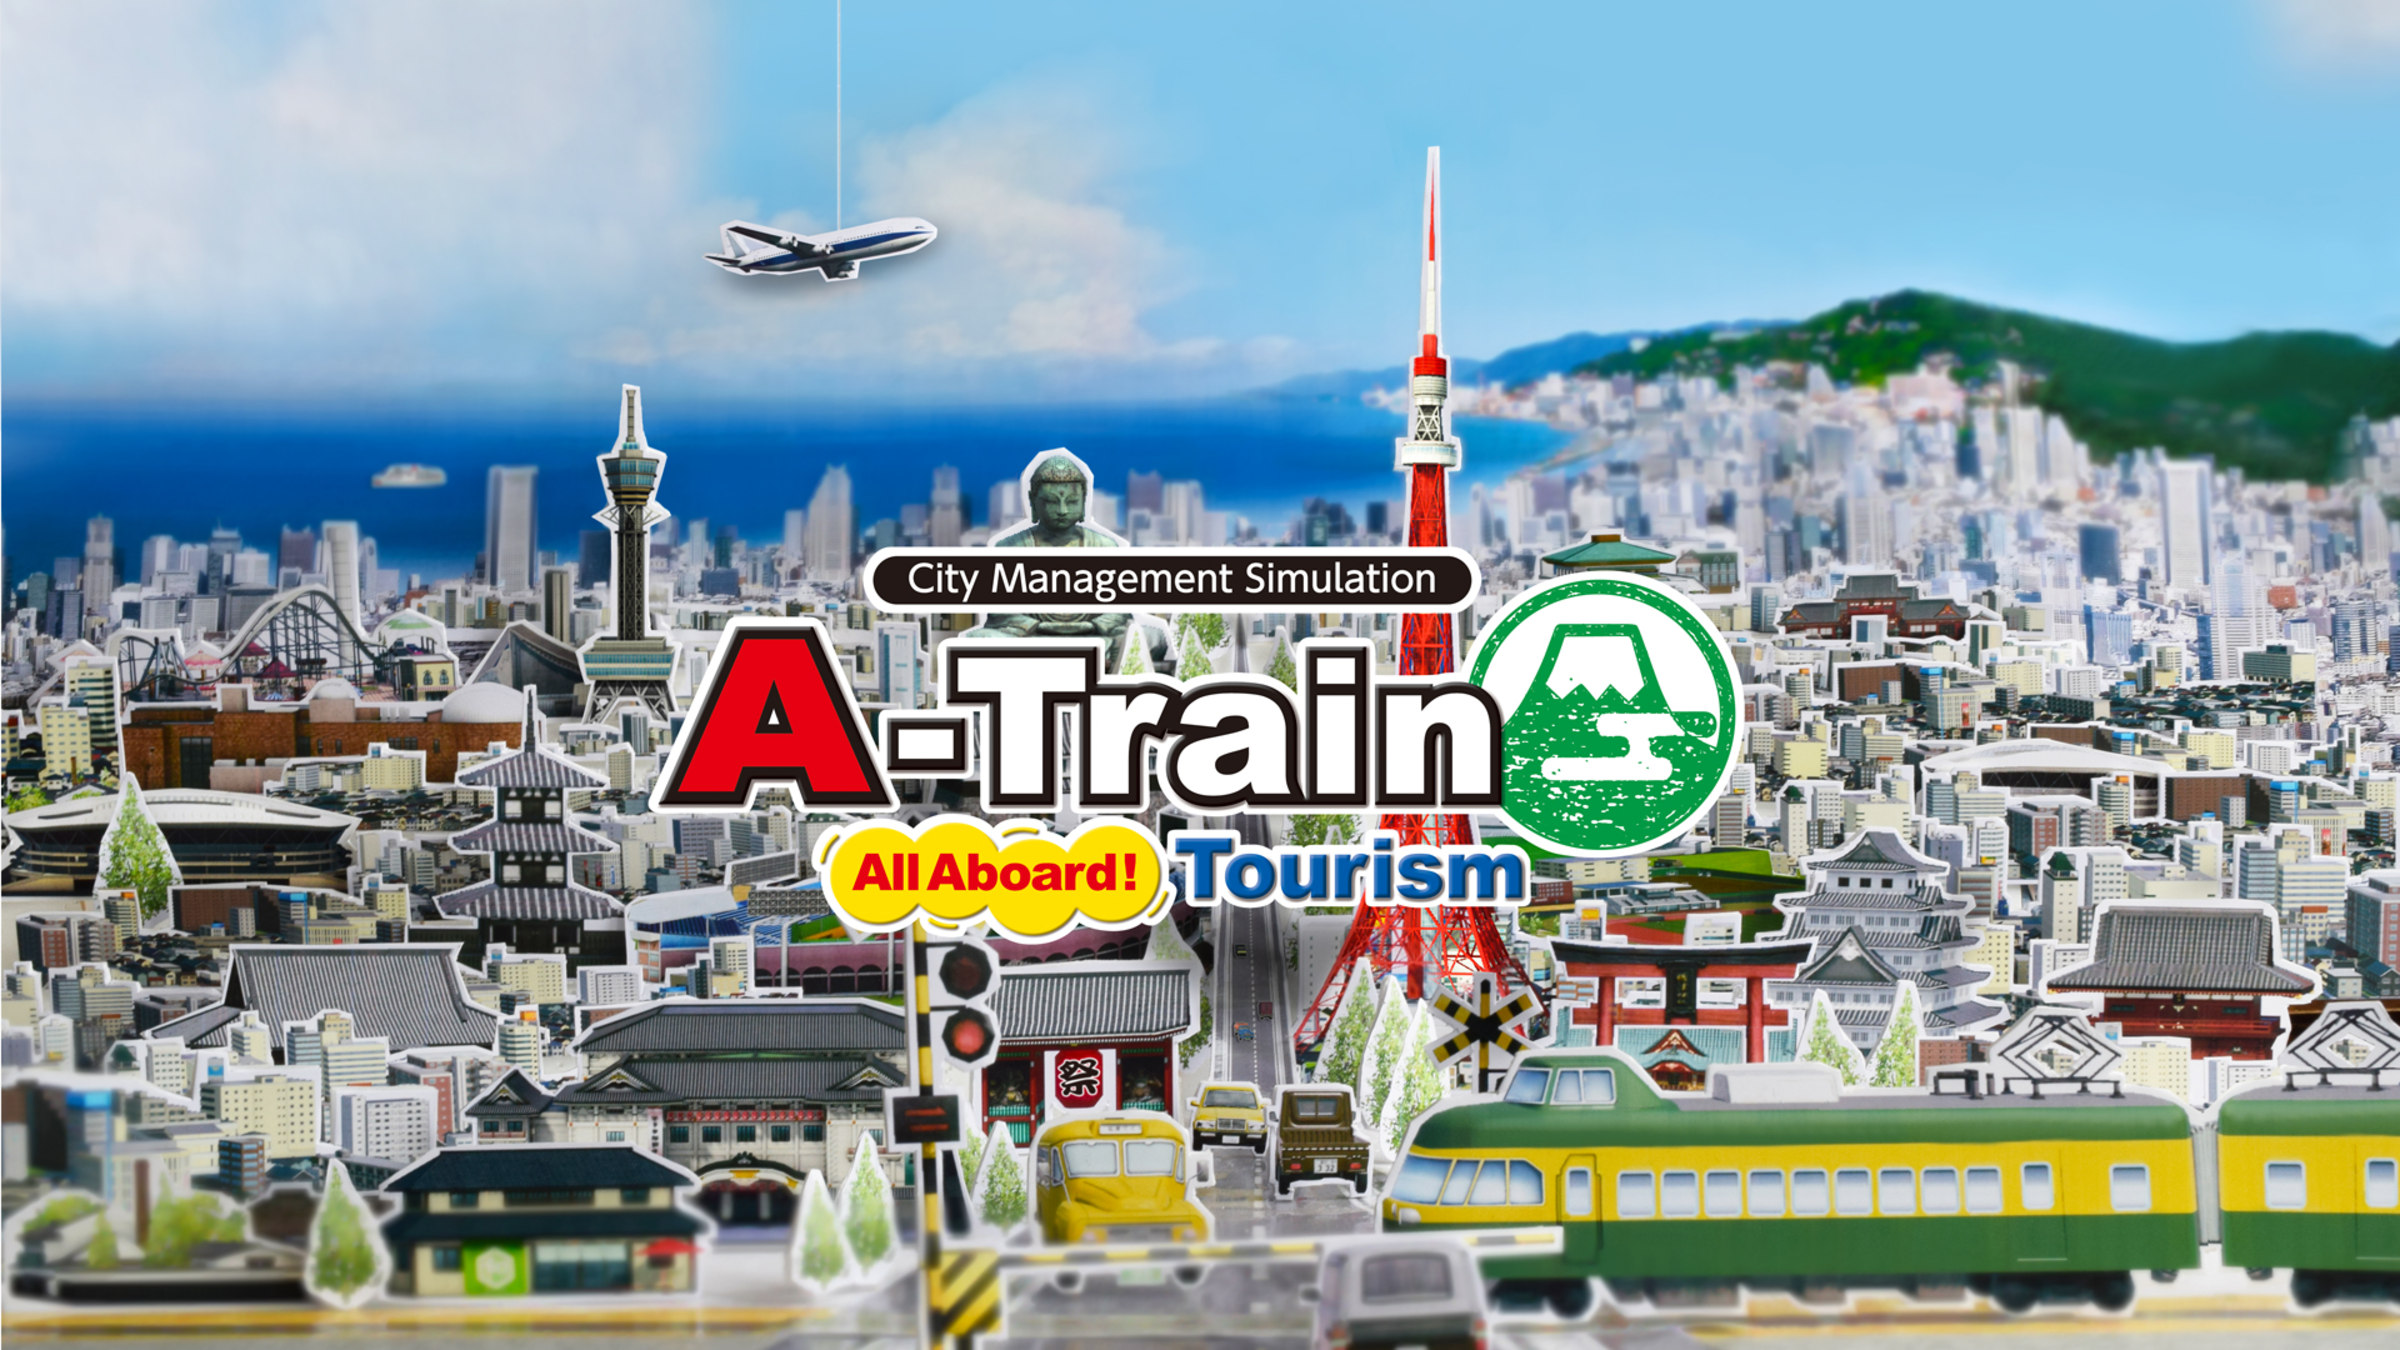 A-Train: All Aboard! Tourism for Nintendo Switch - Nintendo Official Site